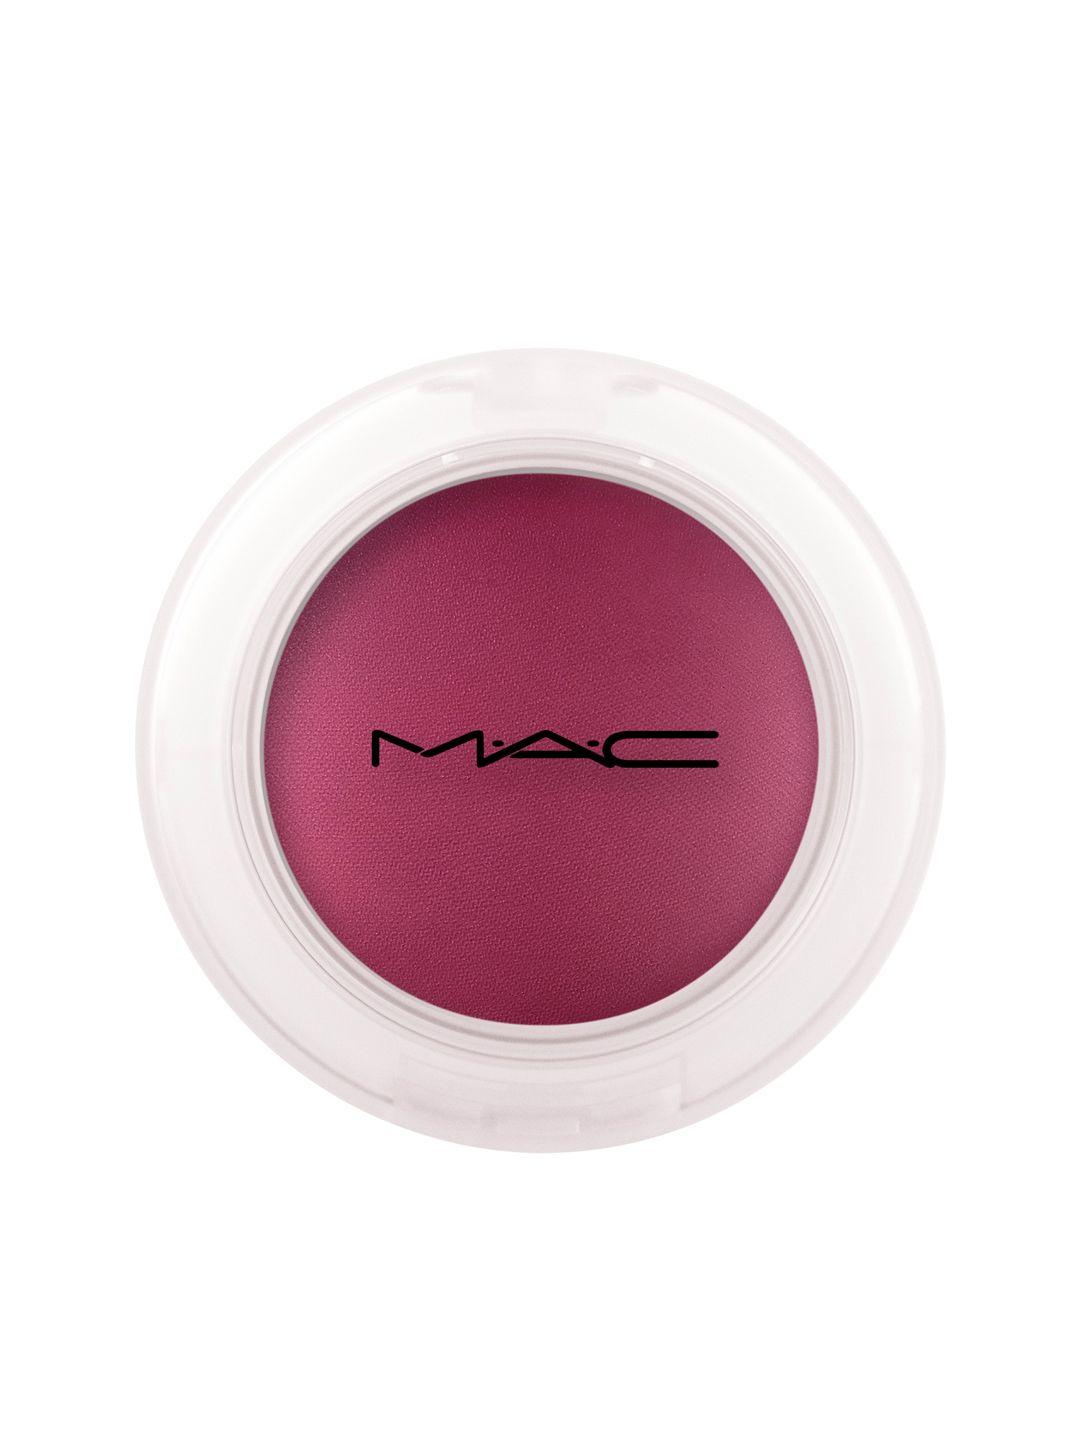 m.a.c glow play blush - rosy does it